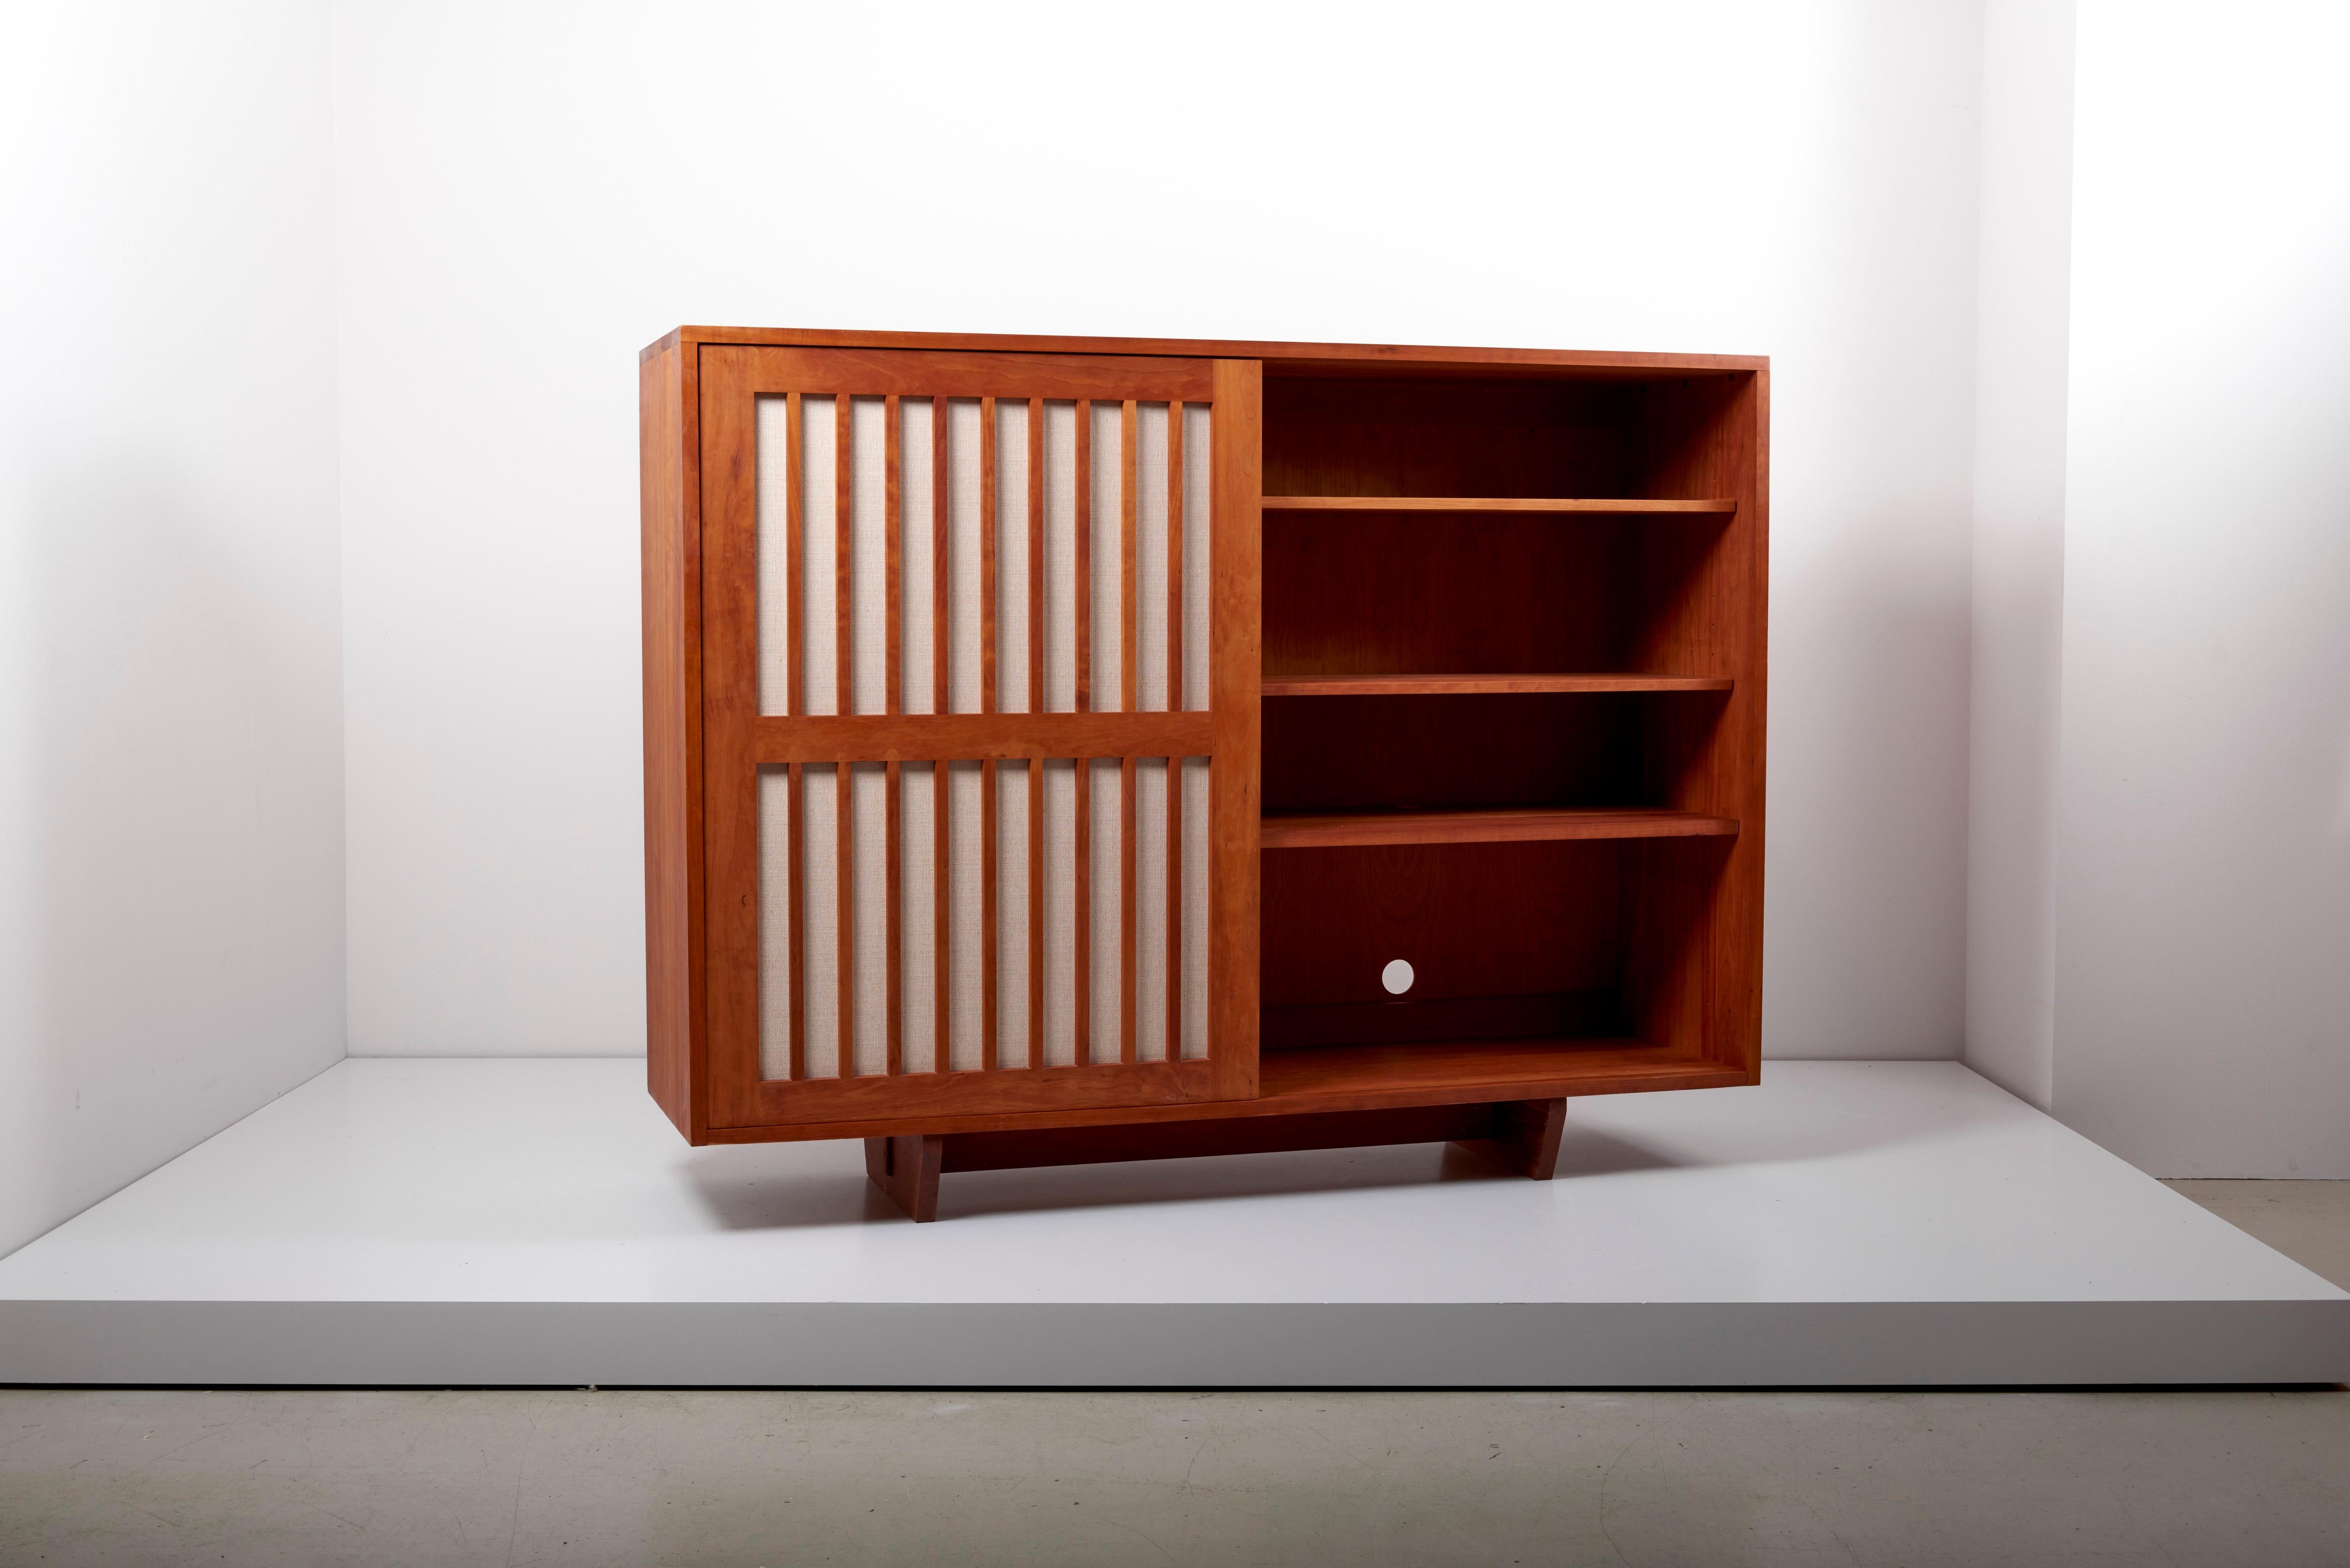 Wooden studio craft cabinet designed by Arden Riddle. This cabinet is made in American cherry.